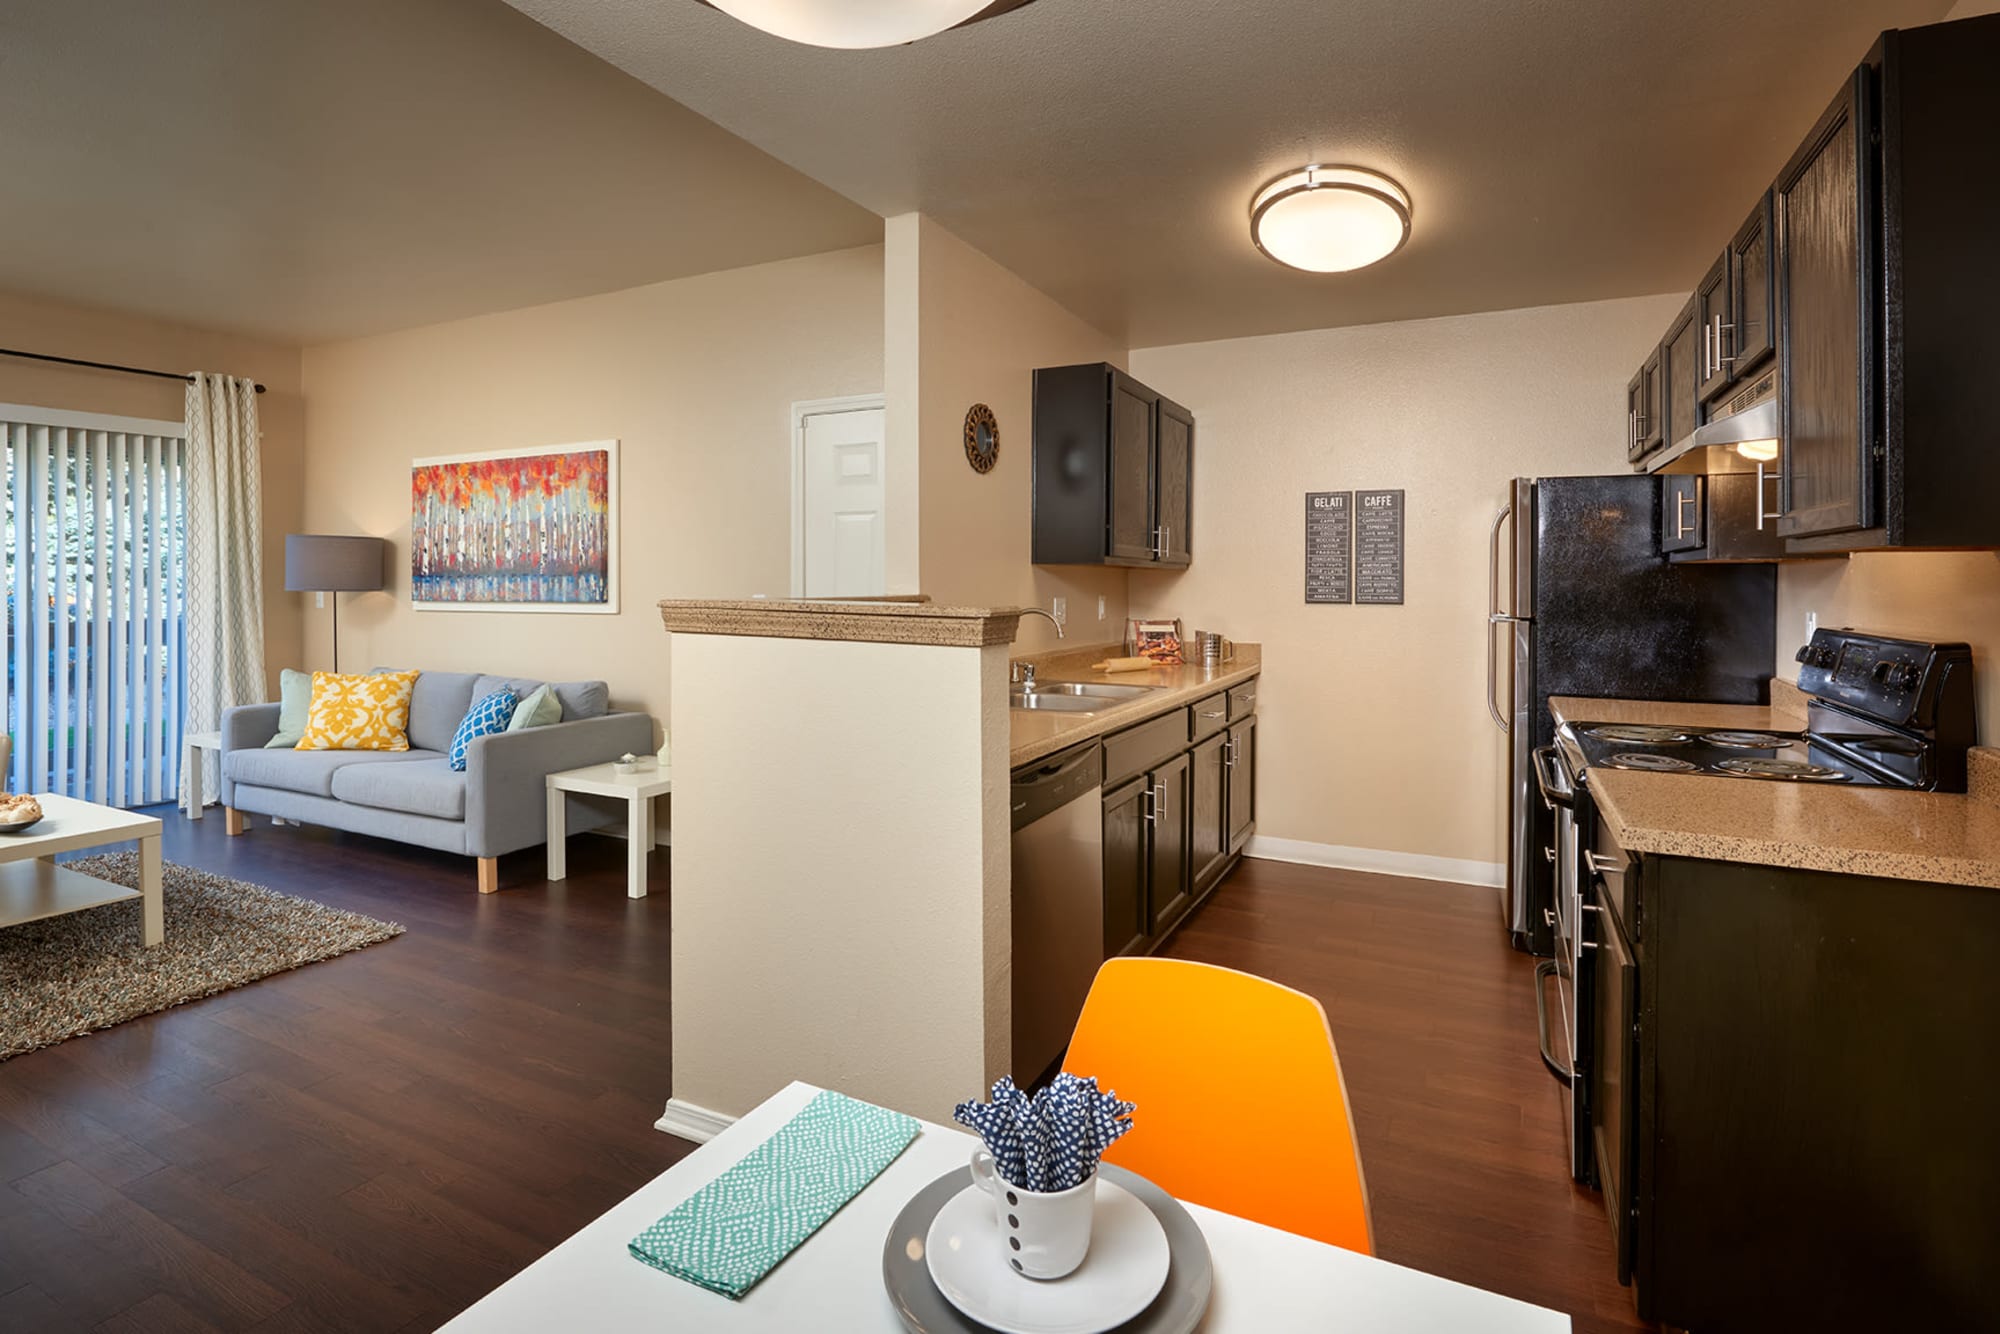 Kitchen and living room at Crossroads at City Center Apartments in Aurora, Colorado